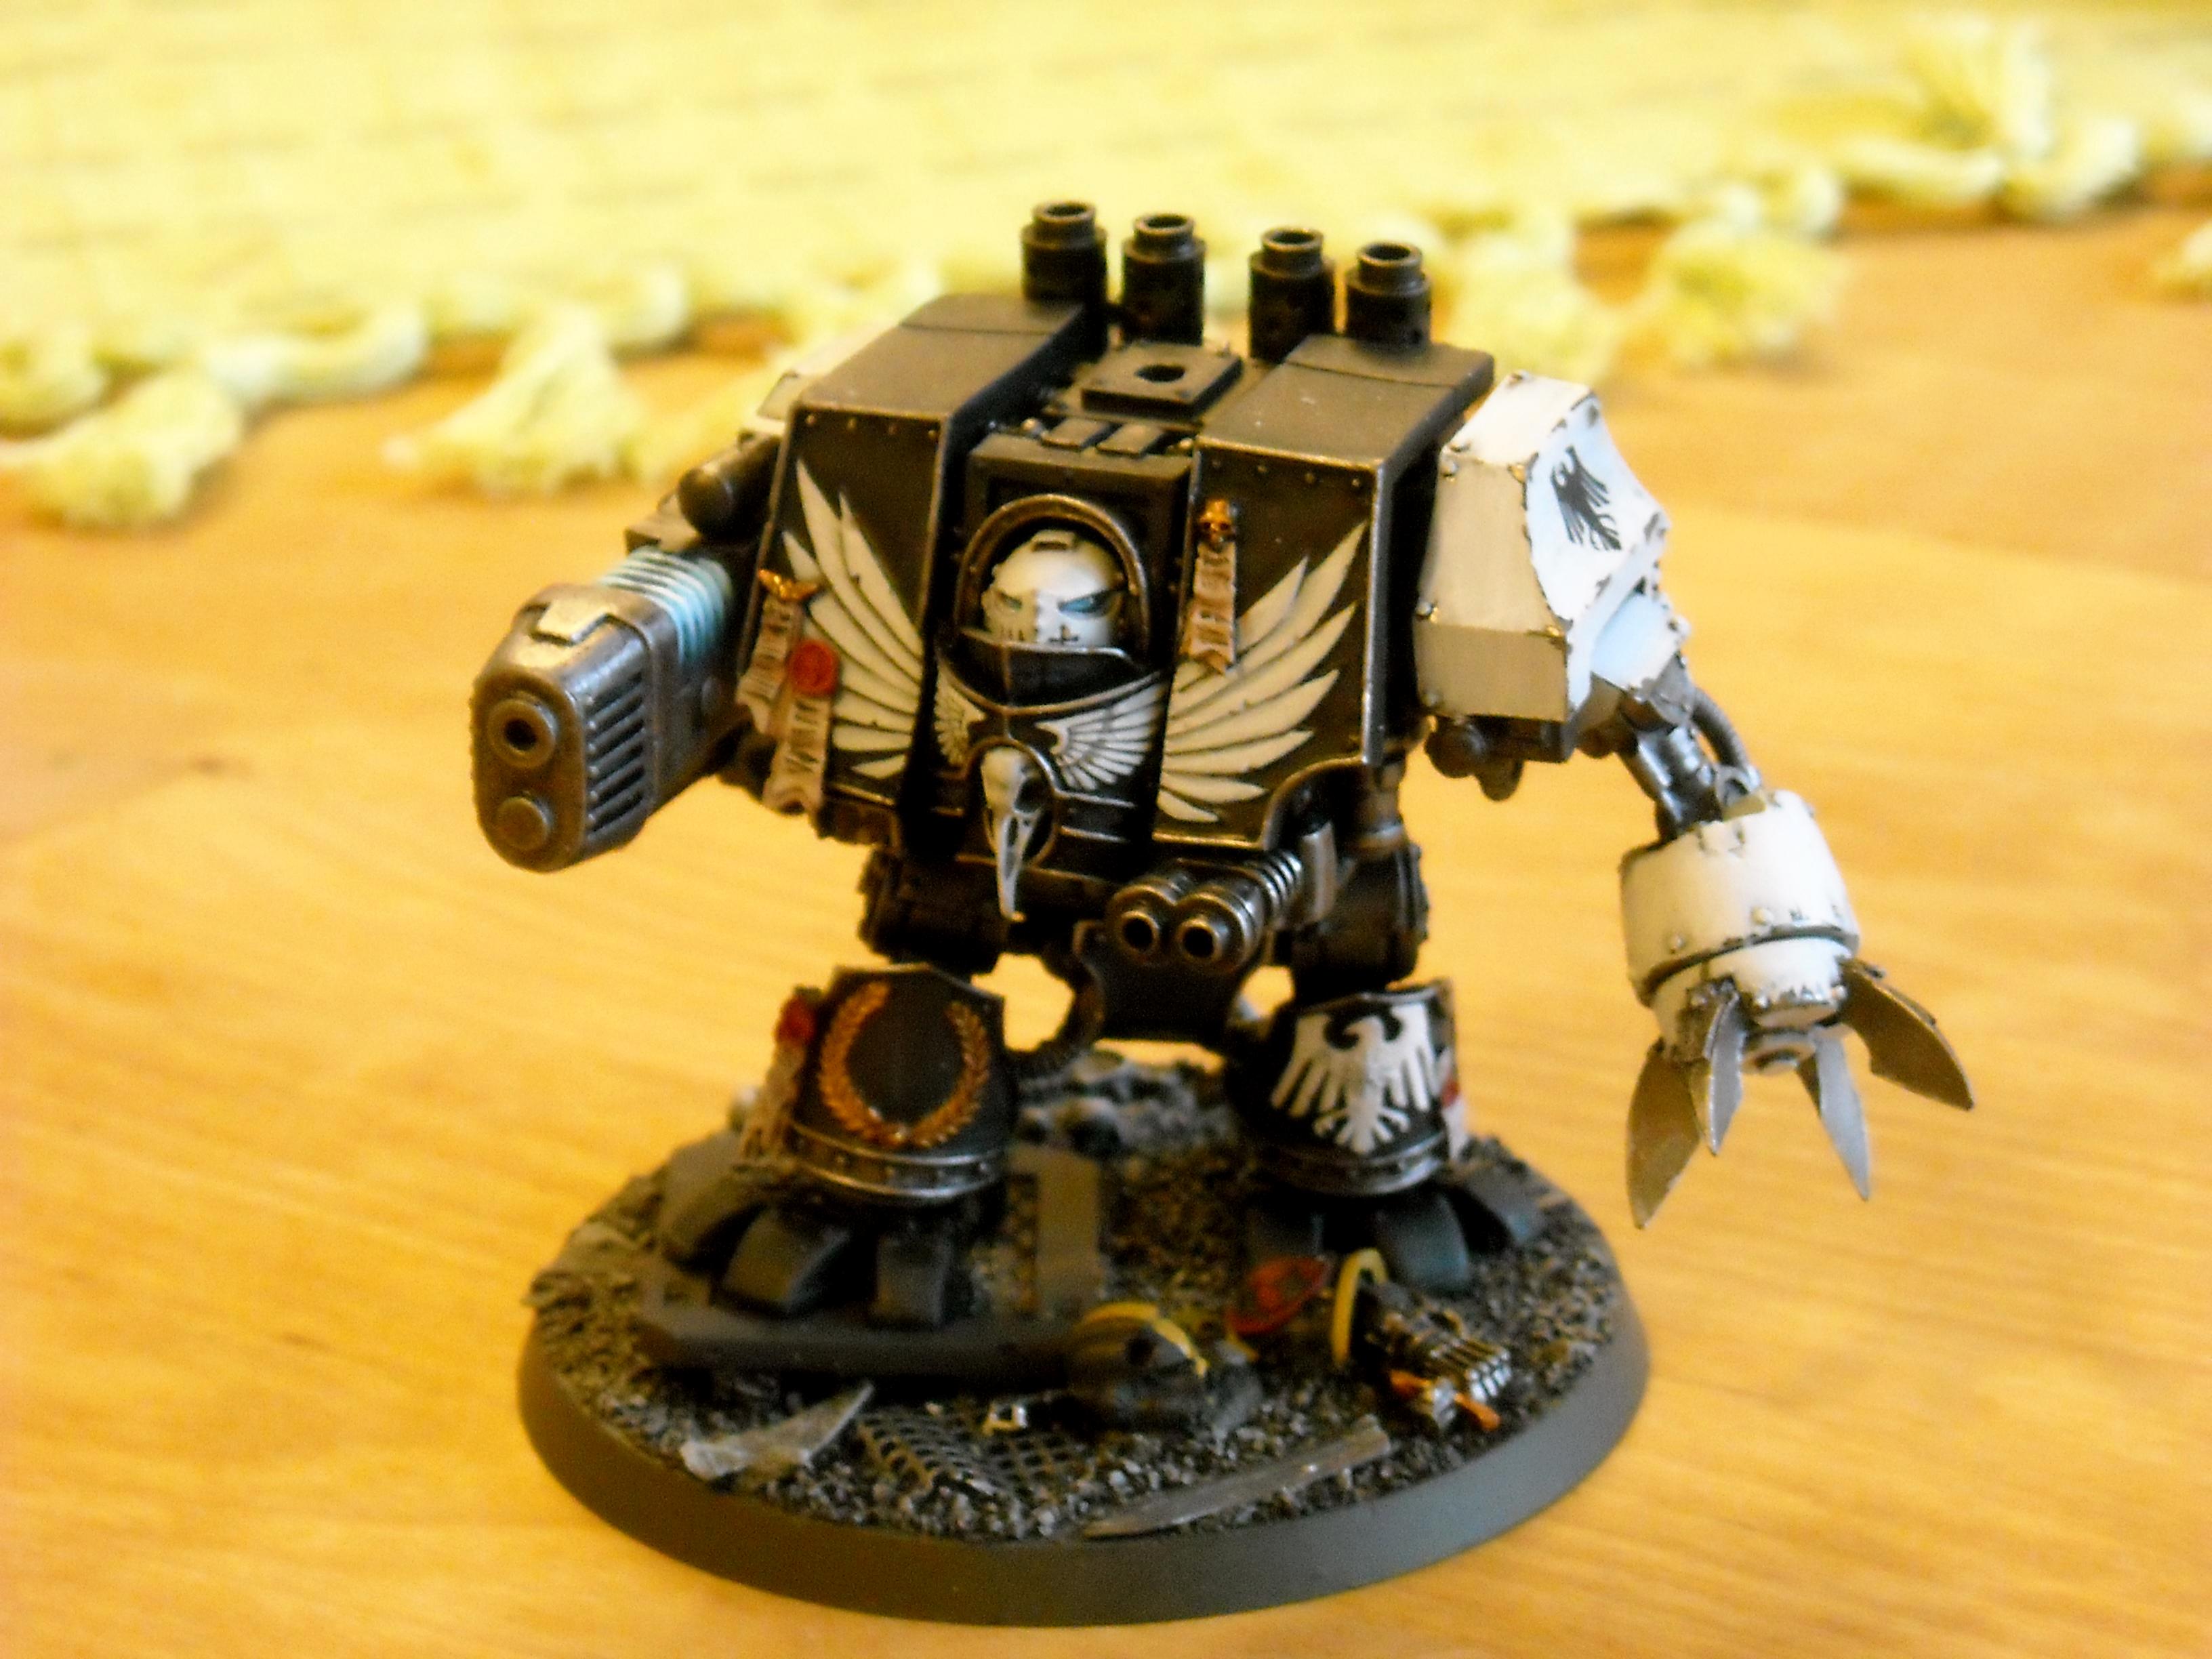 Dreadnought, Raven Guard, Space Marines